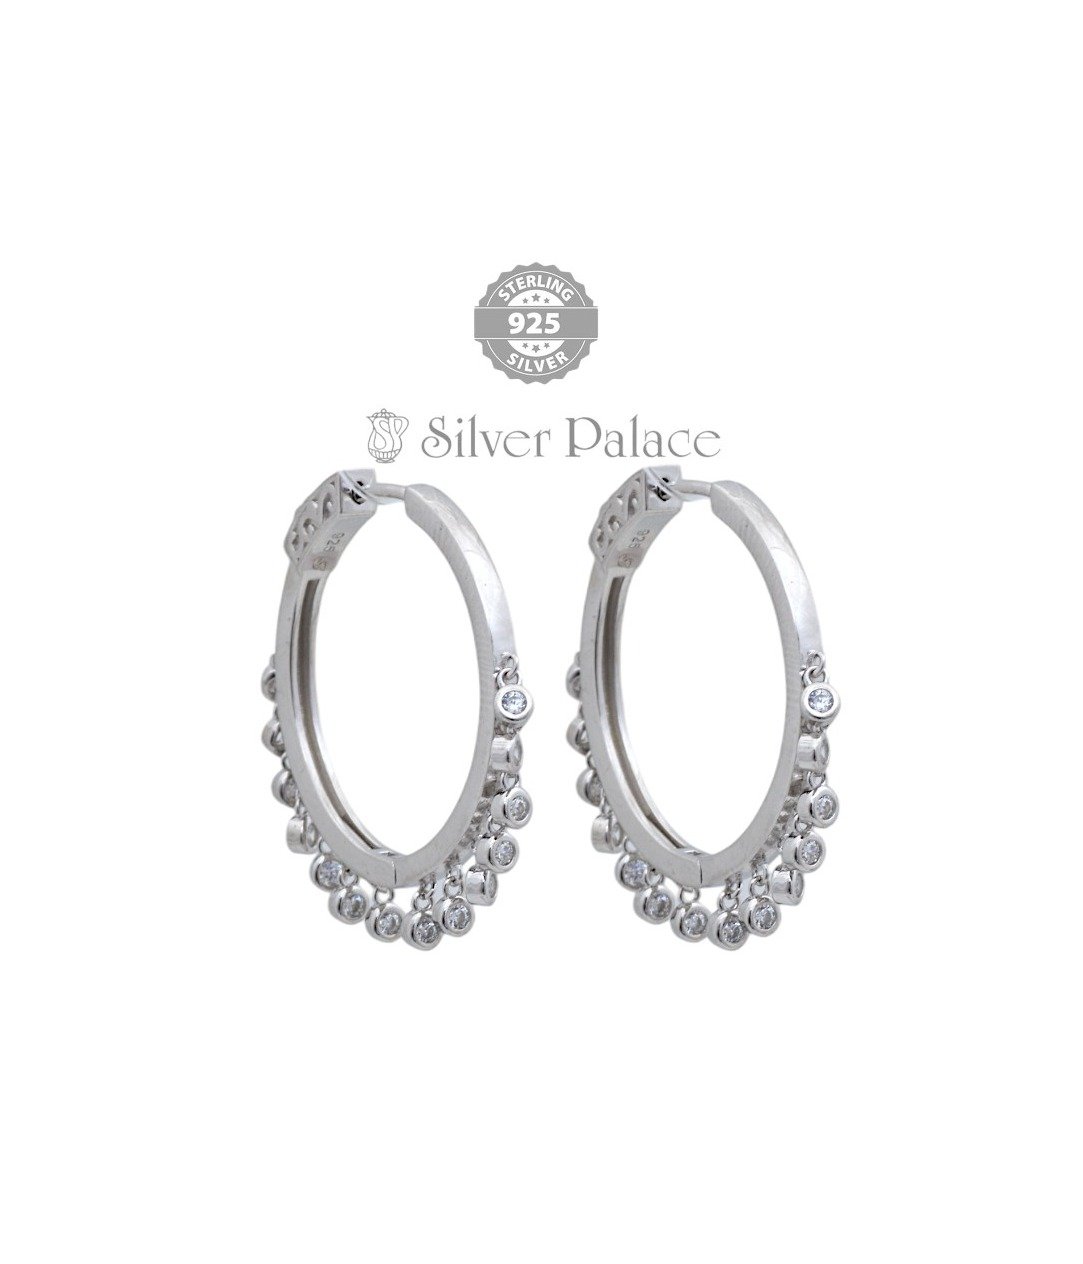 92.5 Pure Silver Earrings Bali with Small Round Dangling CZ For Women/Girls